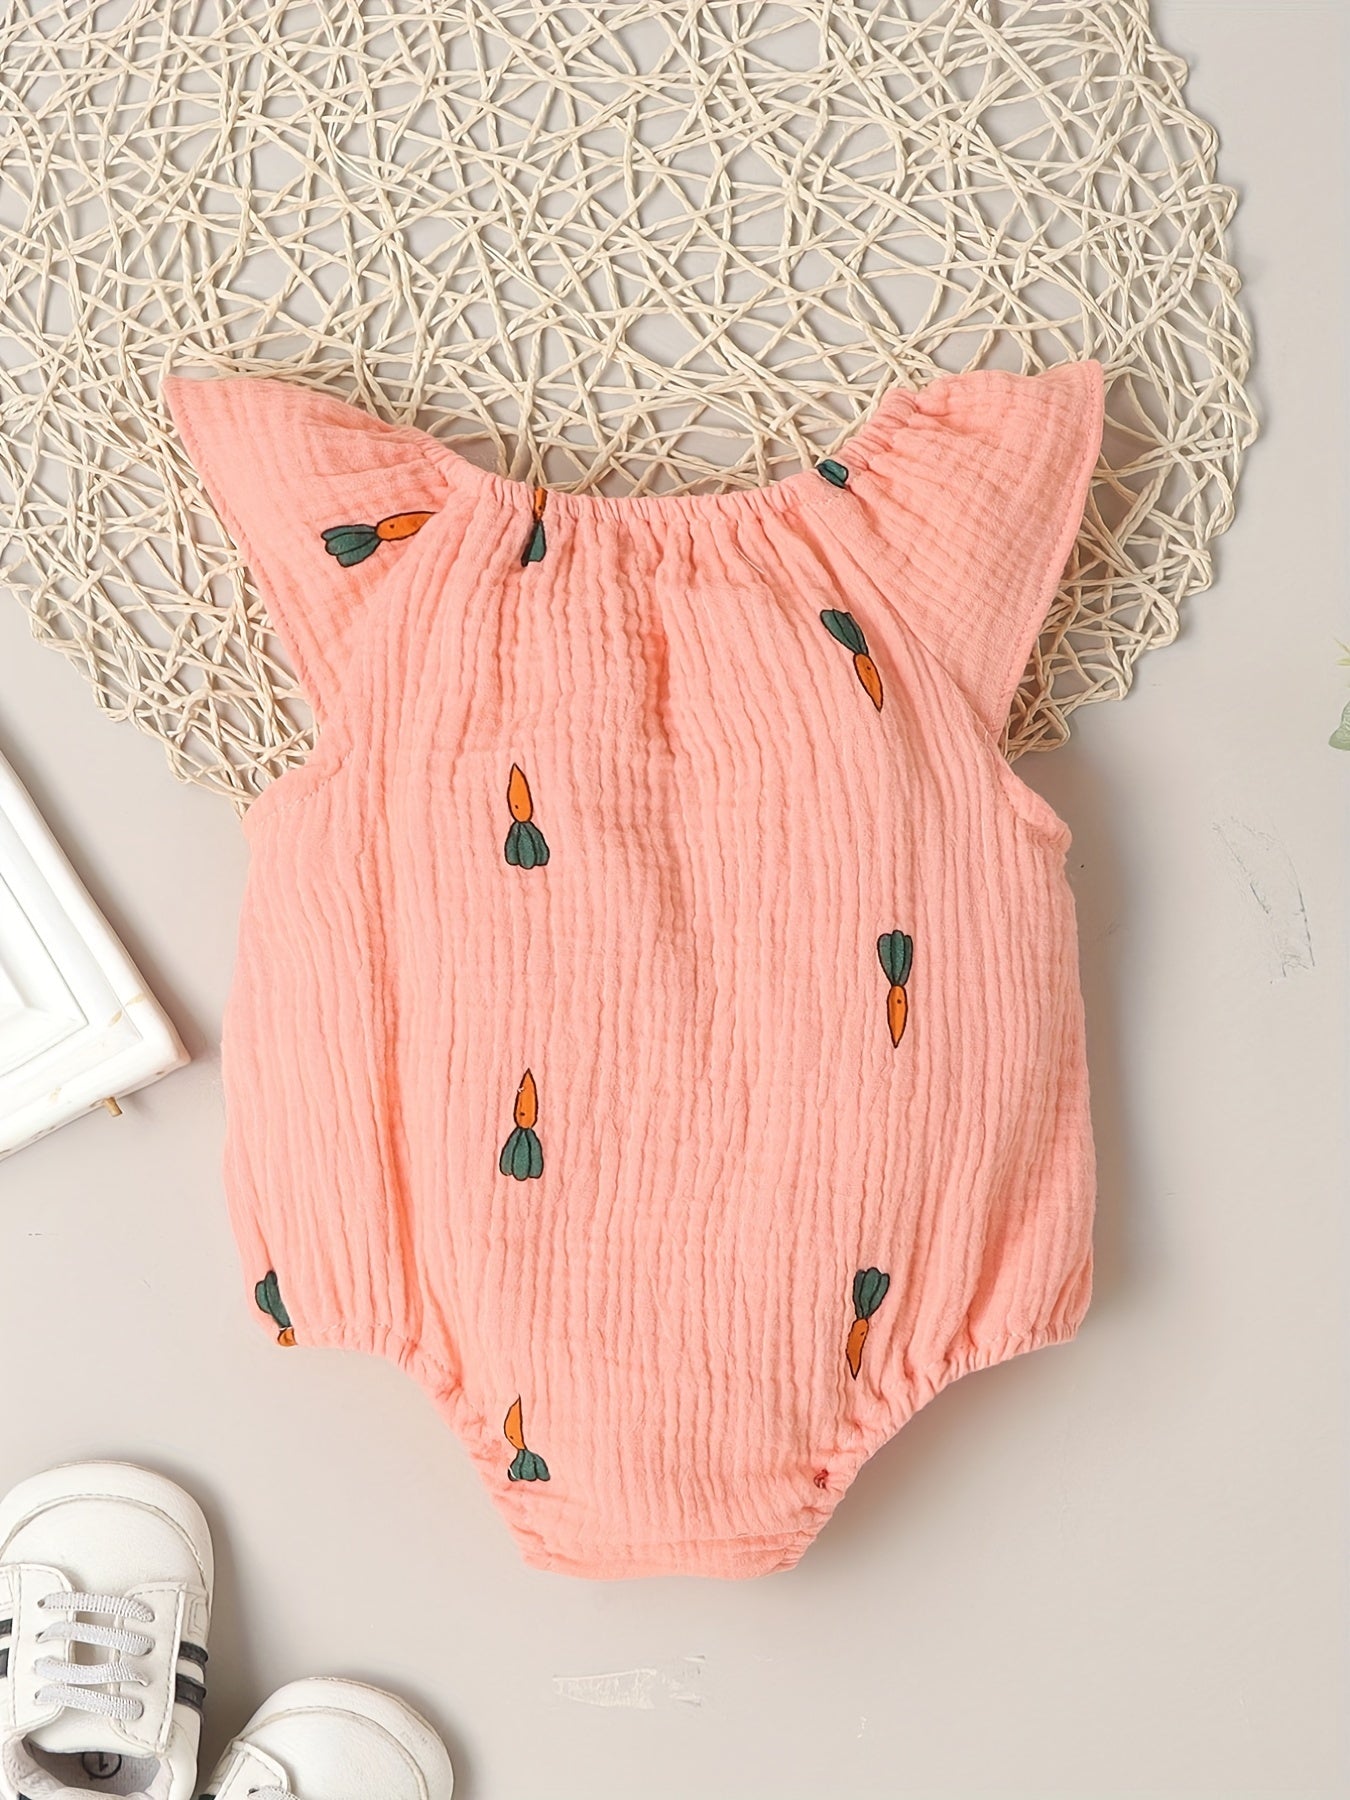 Adorable Baby Girl Outfits - Assorted Designs of Fly Sleeve Cotton Onesies!